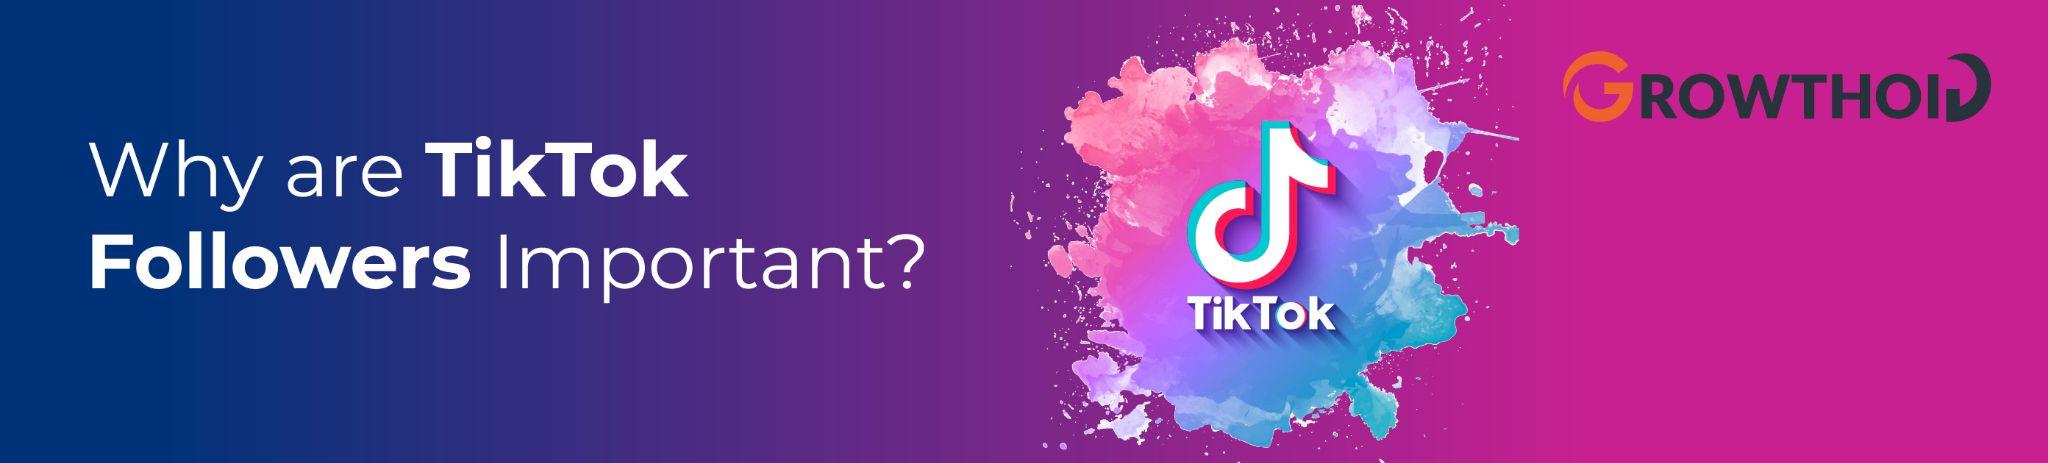 Why are TikTok Followers Important? 